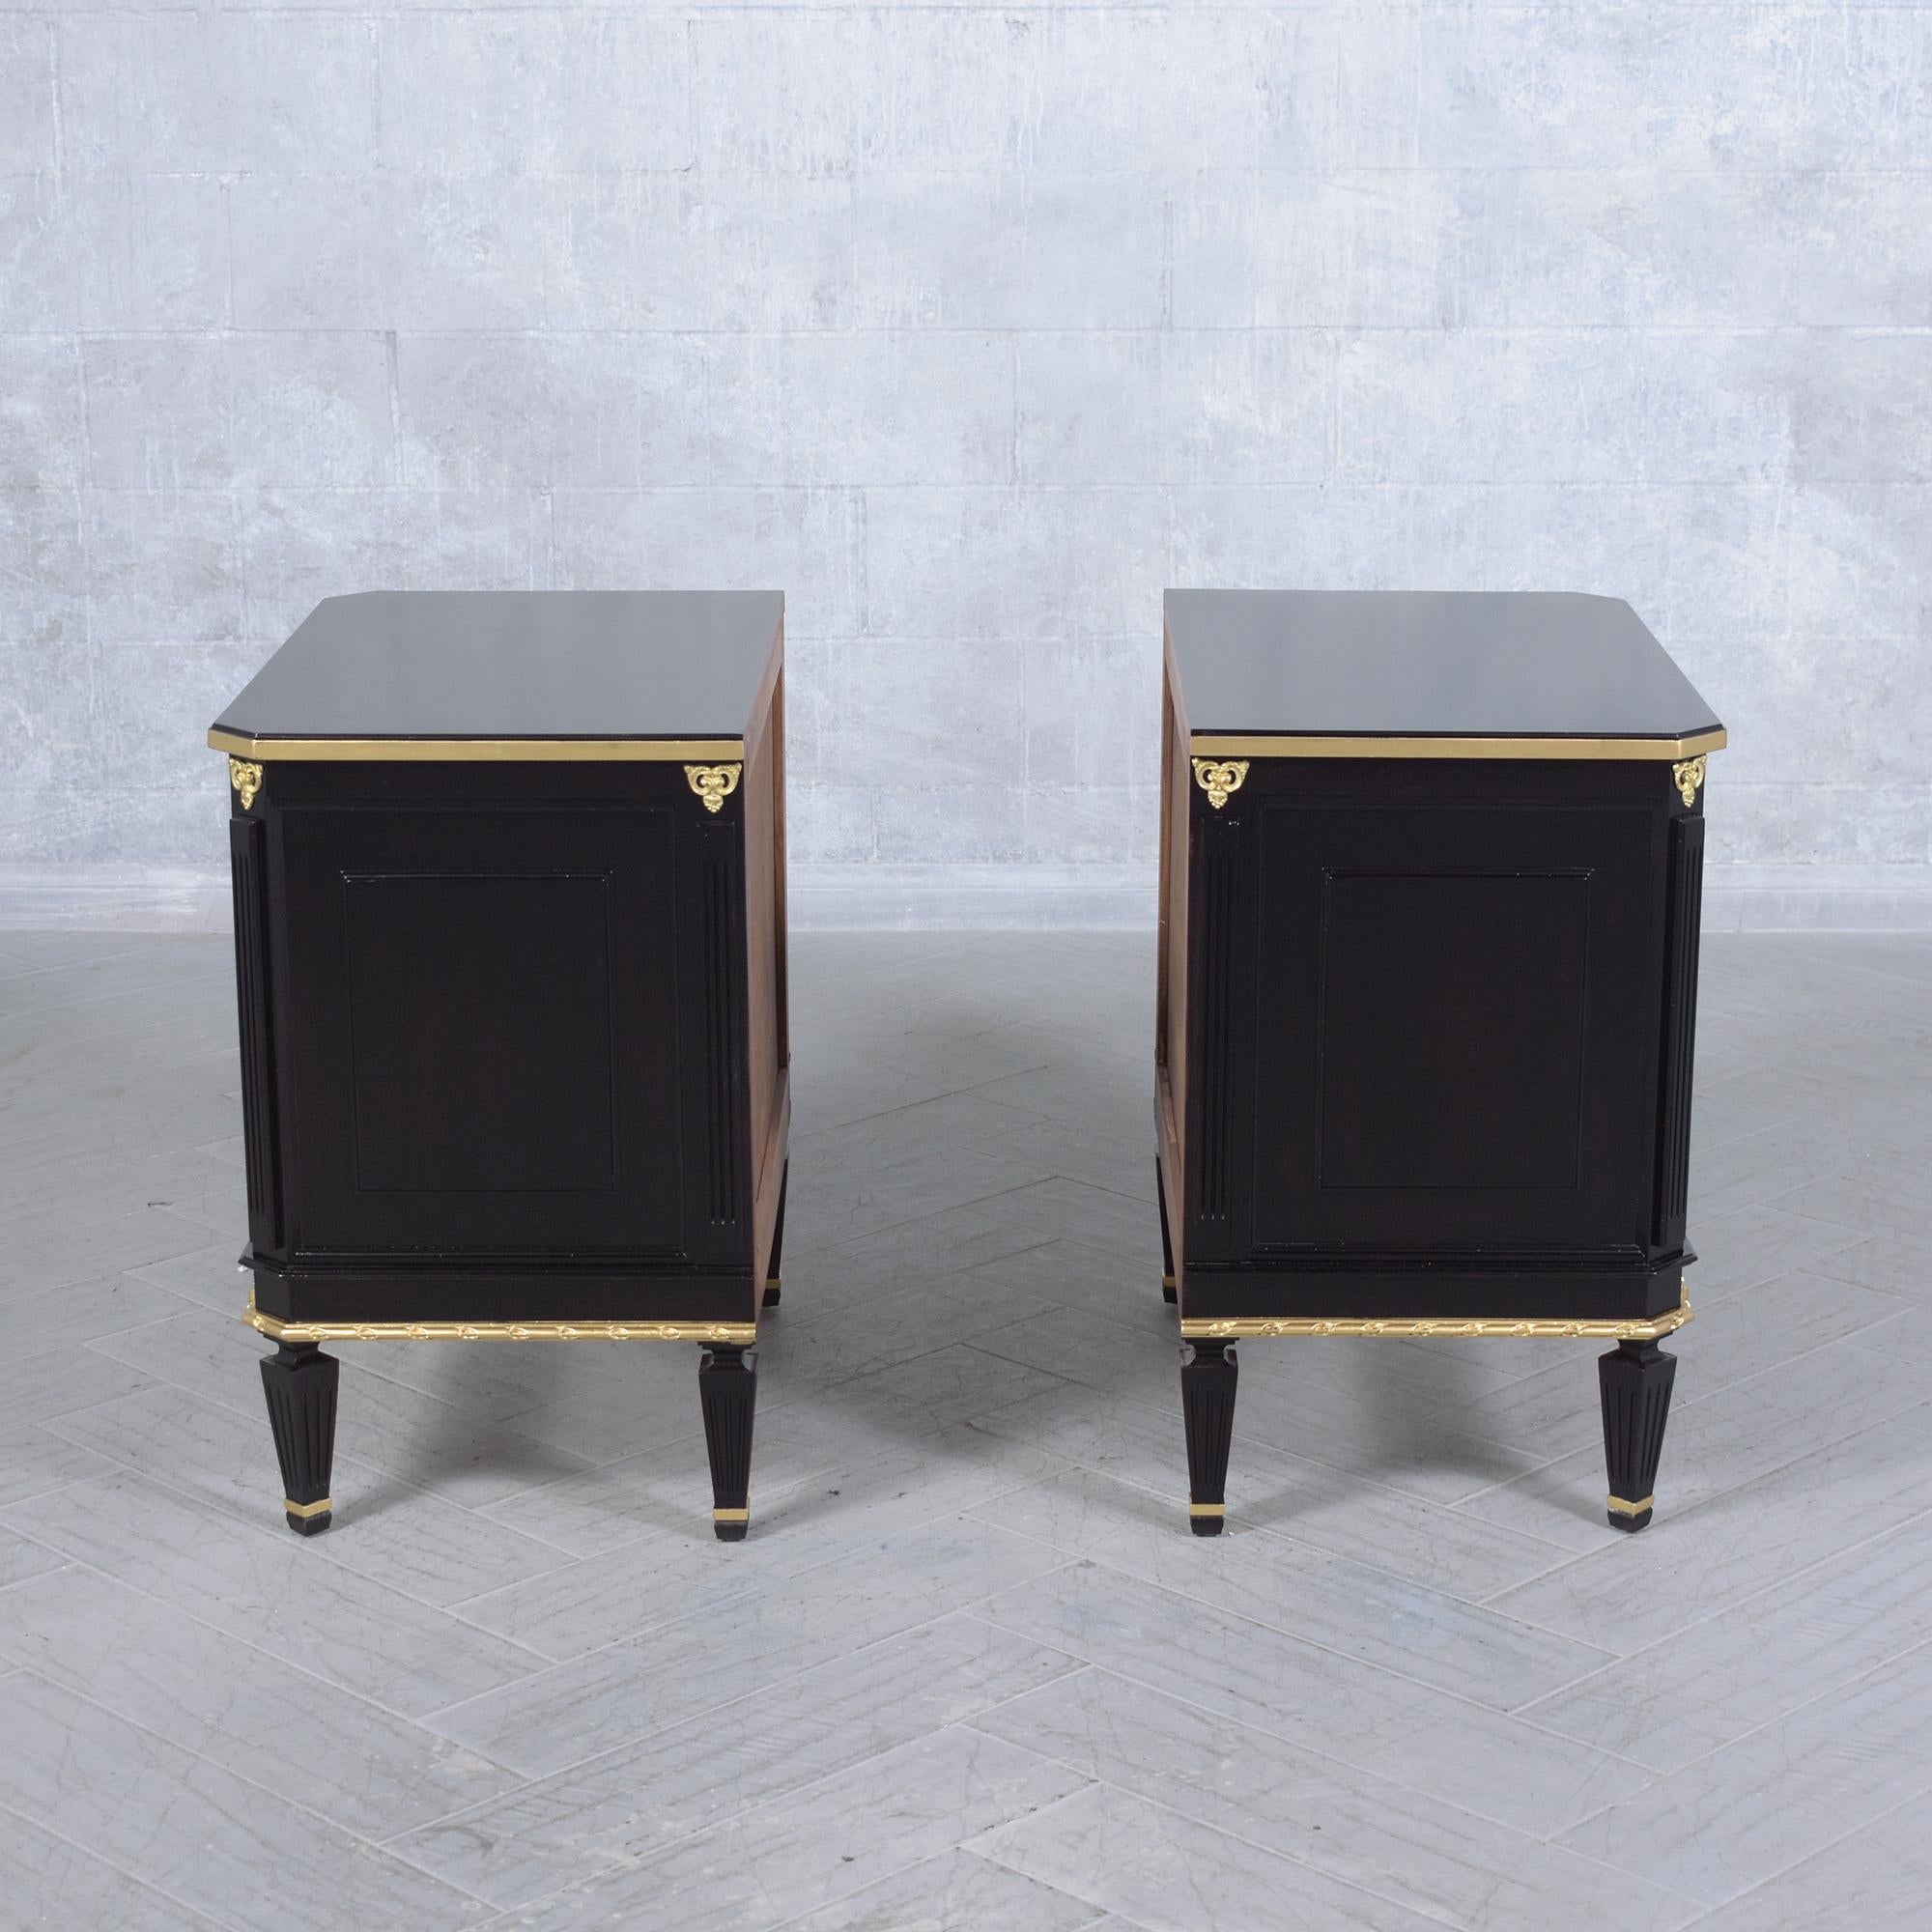 Carved Vintage Louis XVI Mahogany Commodes: Timeless Nightstands for the Modern Home